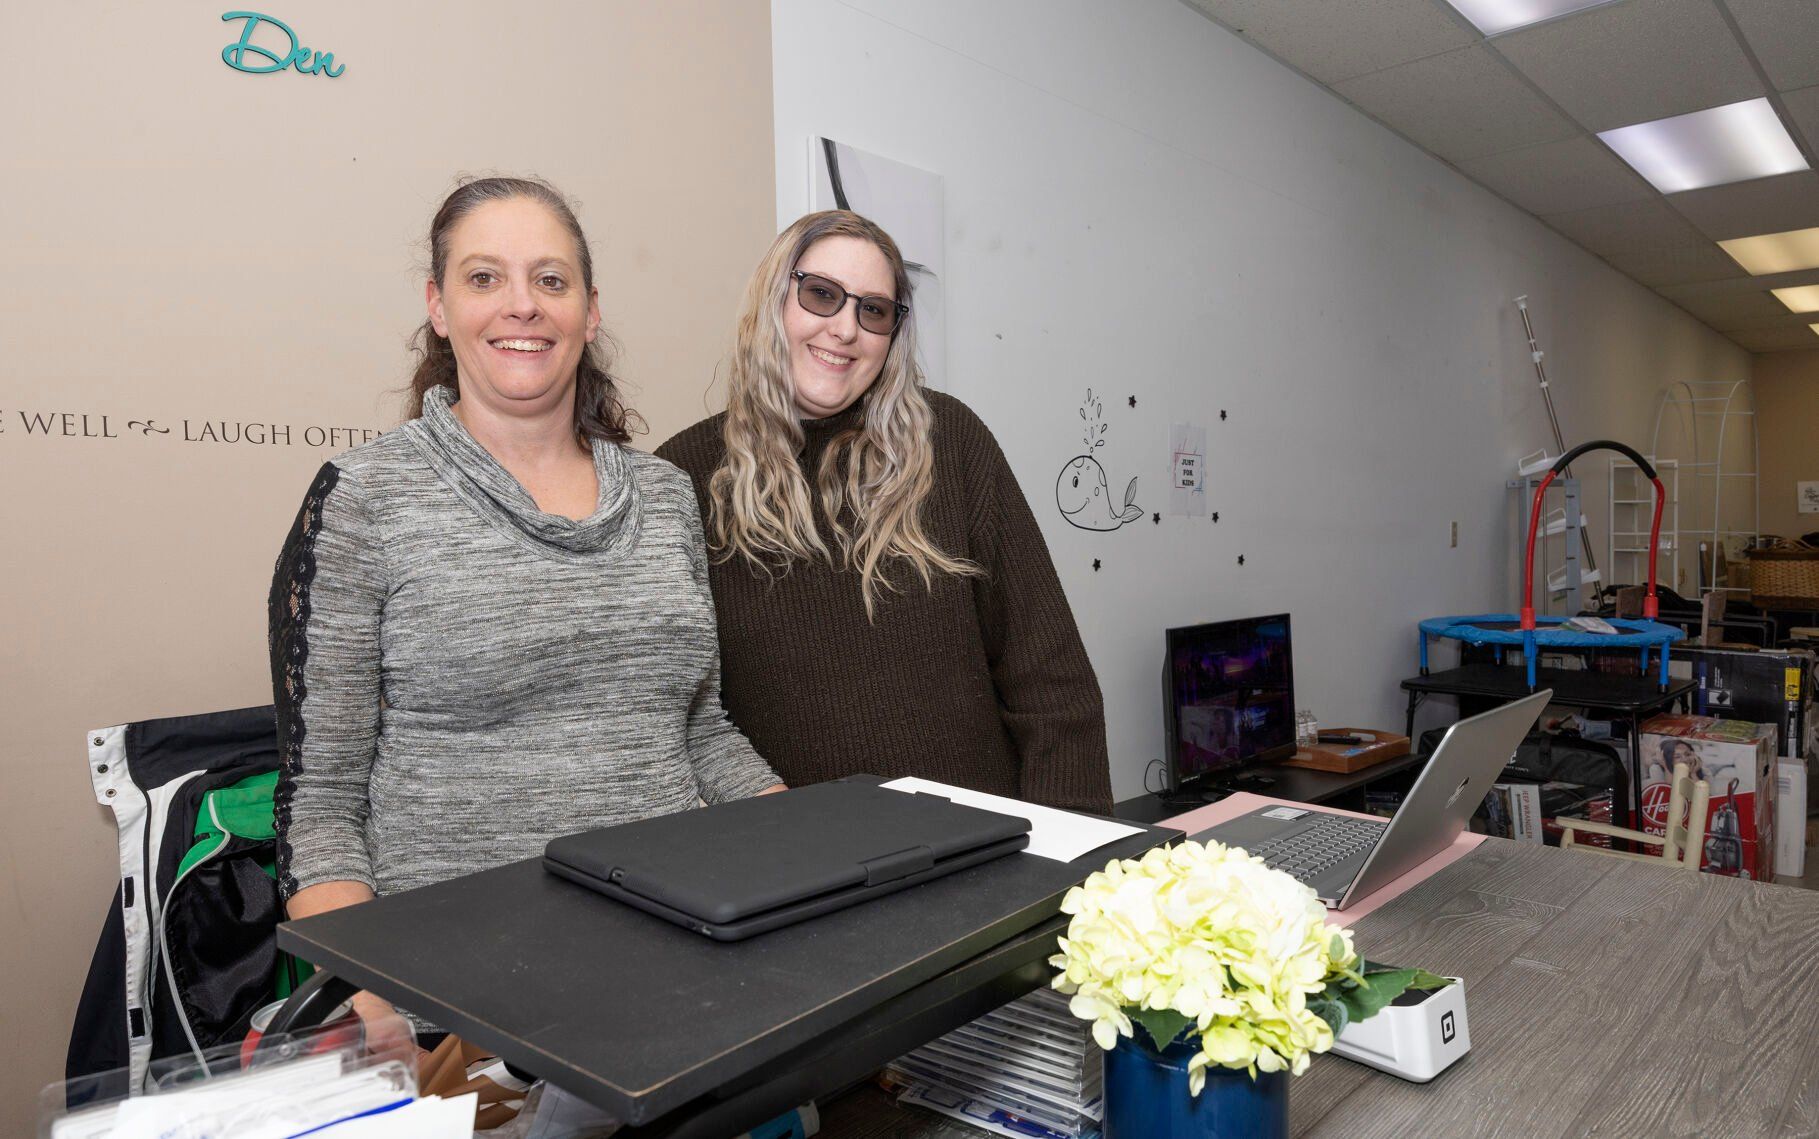 Owners Shelly Hess (left) and Mikaylah Veglahn inside their new store, Surprise Den, in Dyersville, Iowa on Friday, March 17, 2023.    PHOTO CREDIT: Stephen Gassman